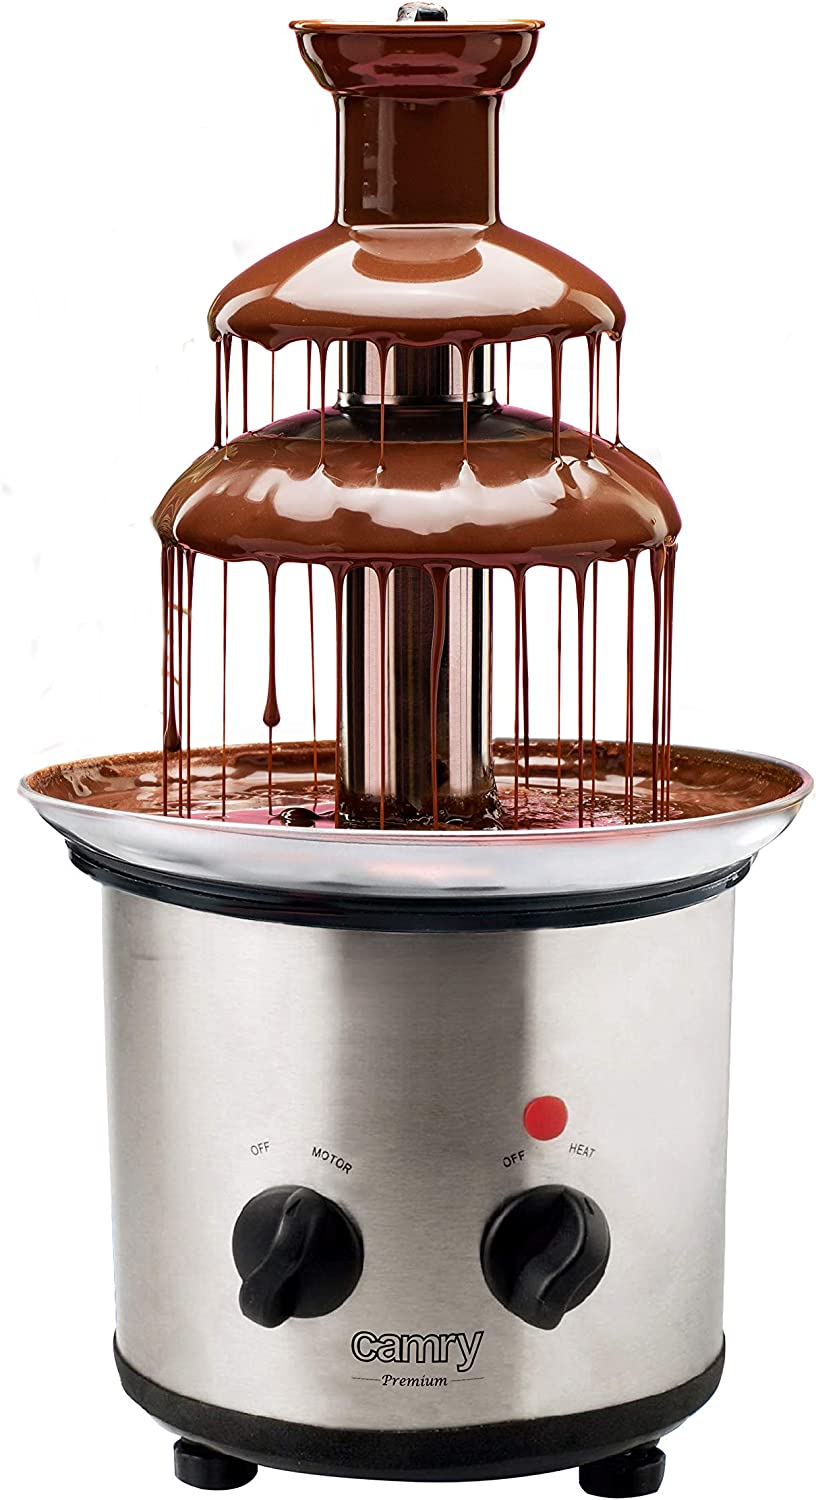 JUNG CAMRY CR4488 Stainless Steel Chocolate Fountain with Melting Function 0.65 L, 3 Levels, 320 W, Chocolate Fountain for Home, Flow Function & Keep Warm Function, Chocolate Fondue, Chocolate Fondue